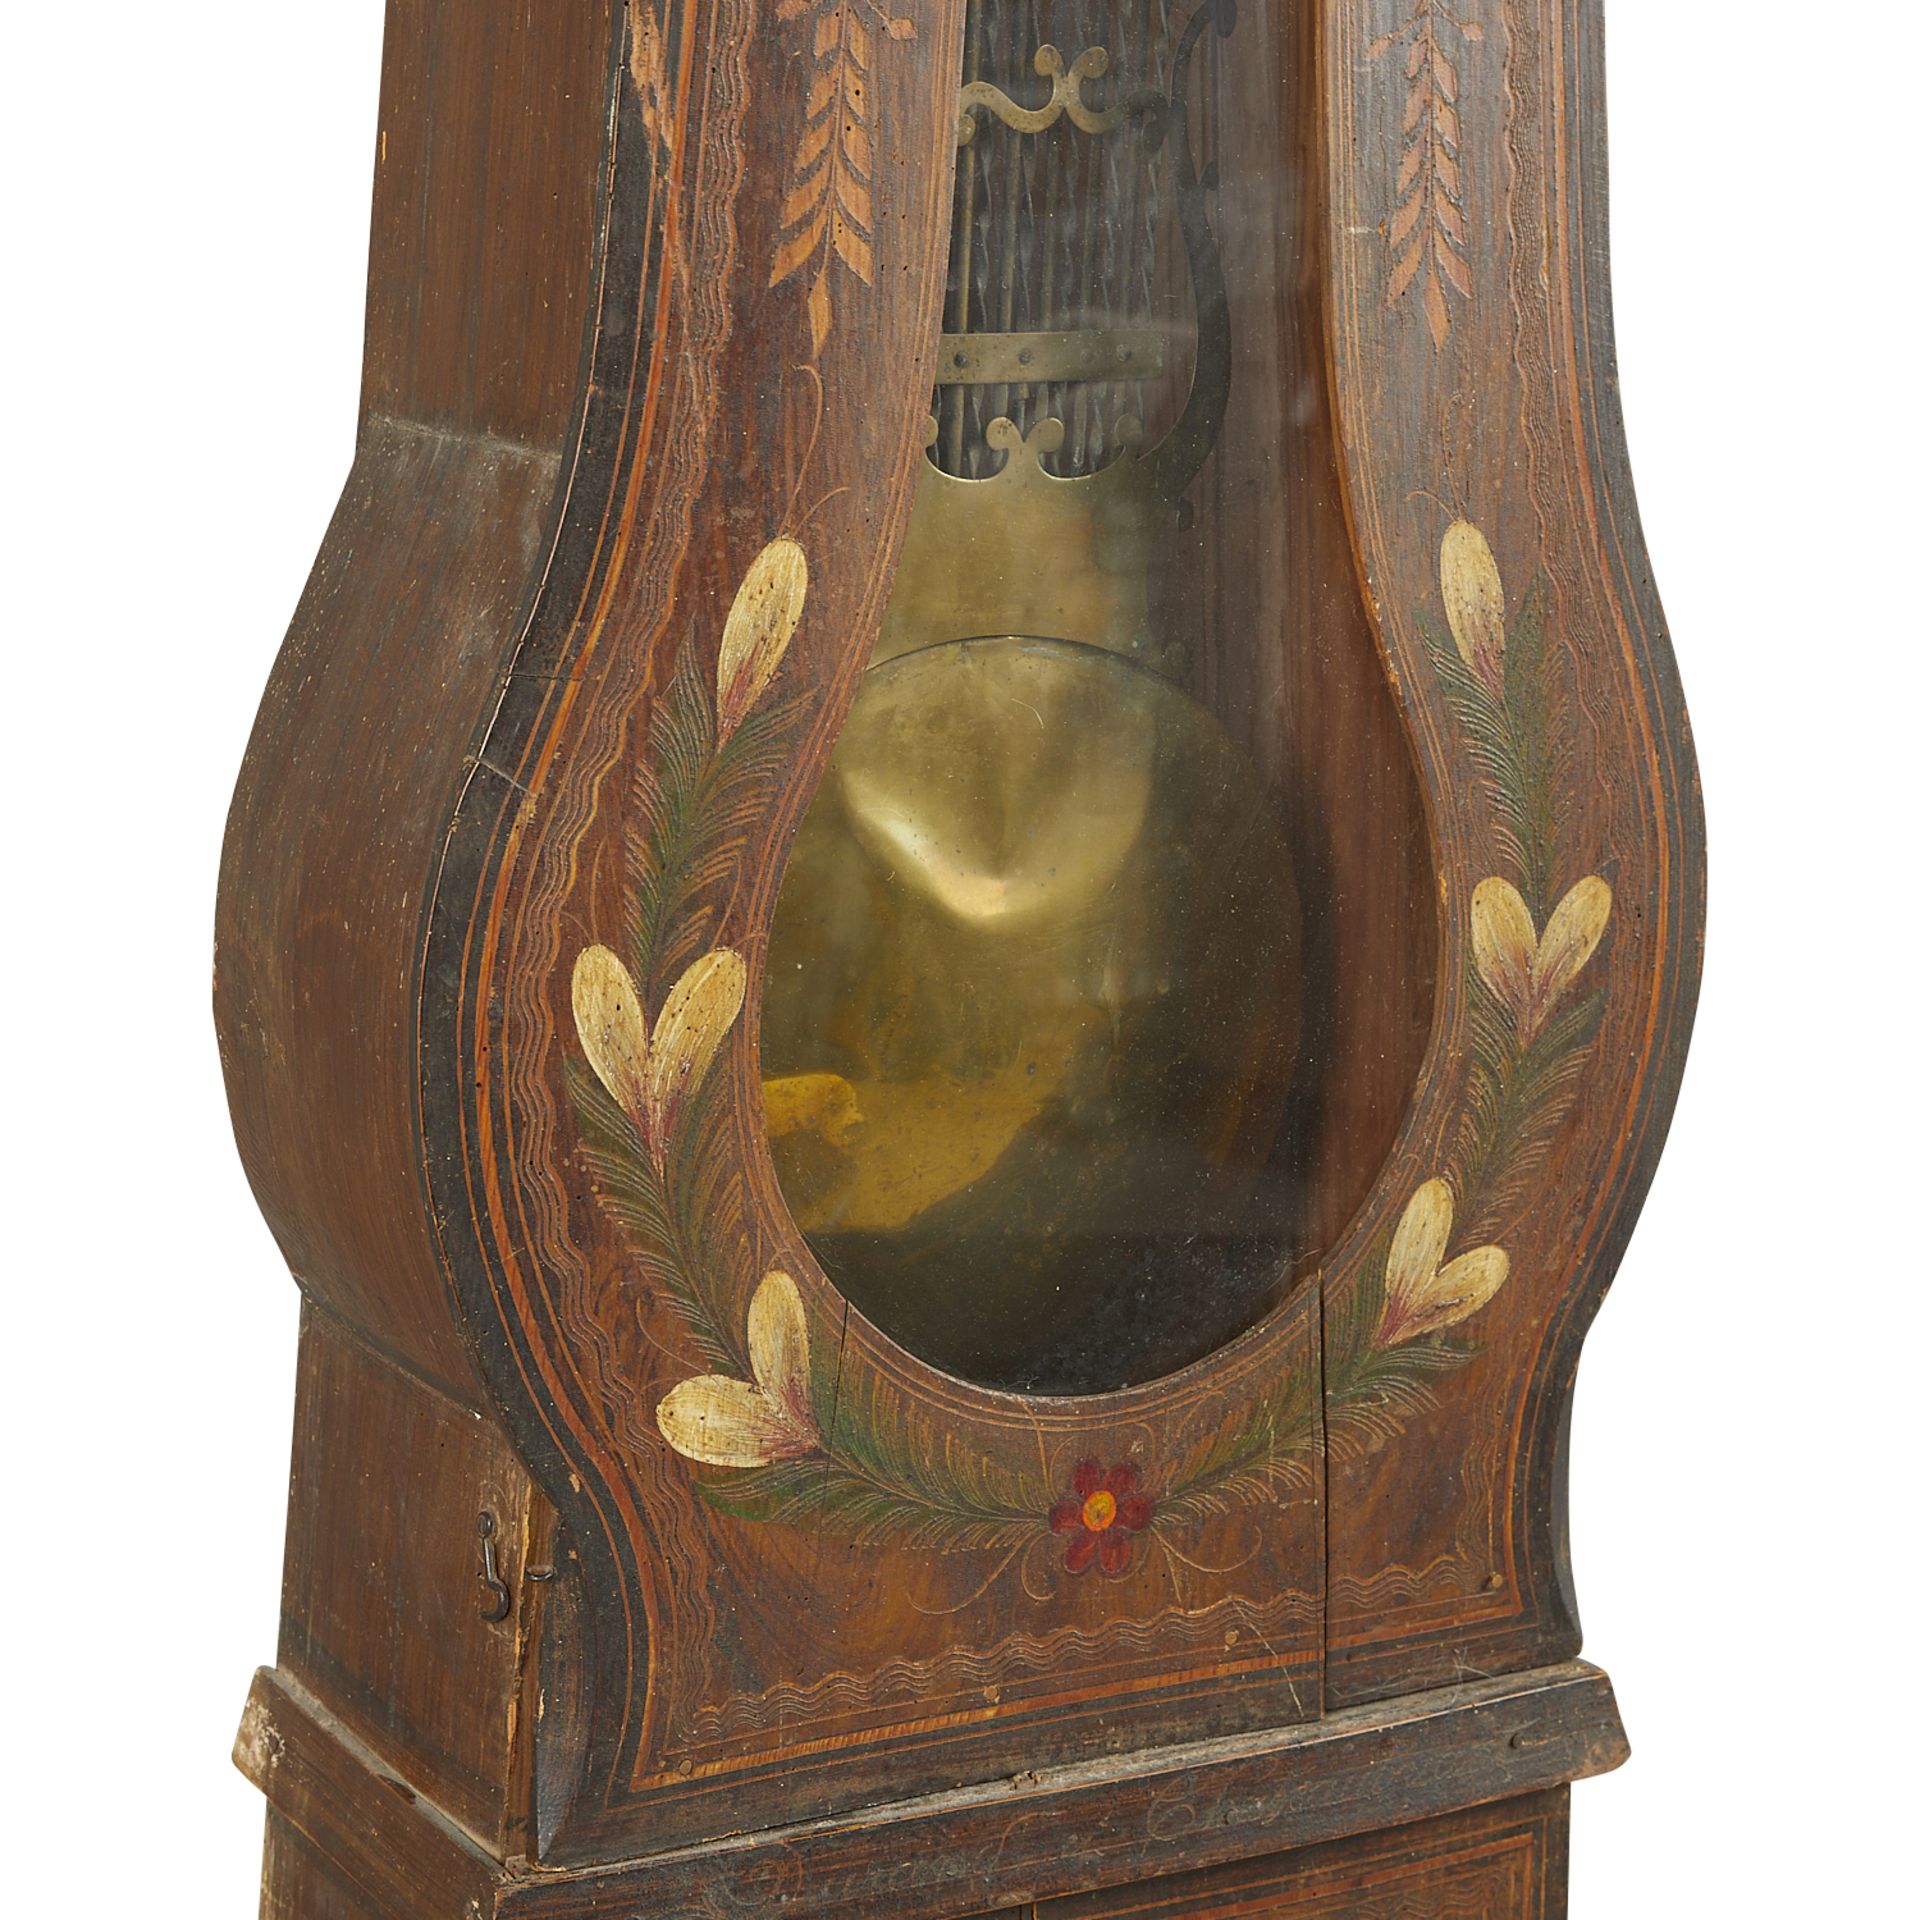 Delarue French Country Painted Grandfather Clock - Image 14 of 22